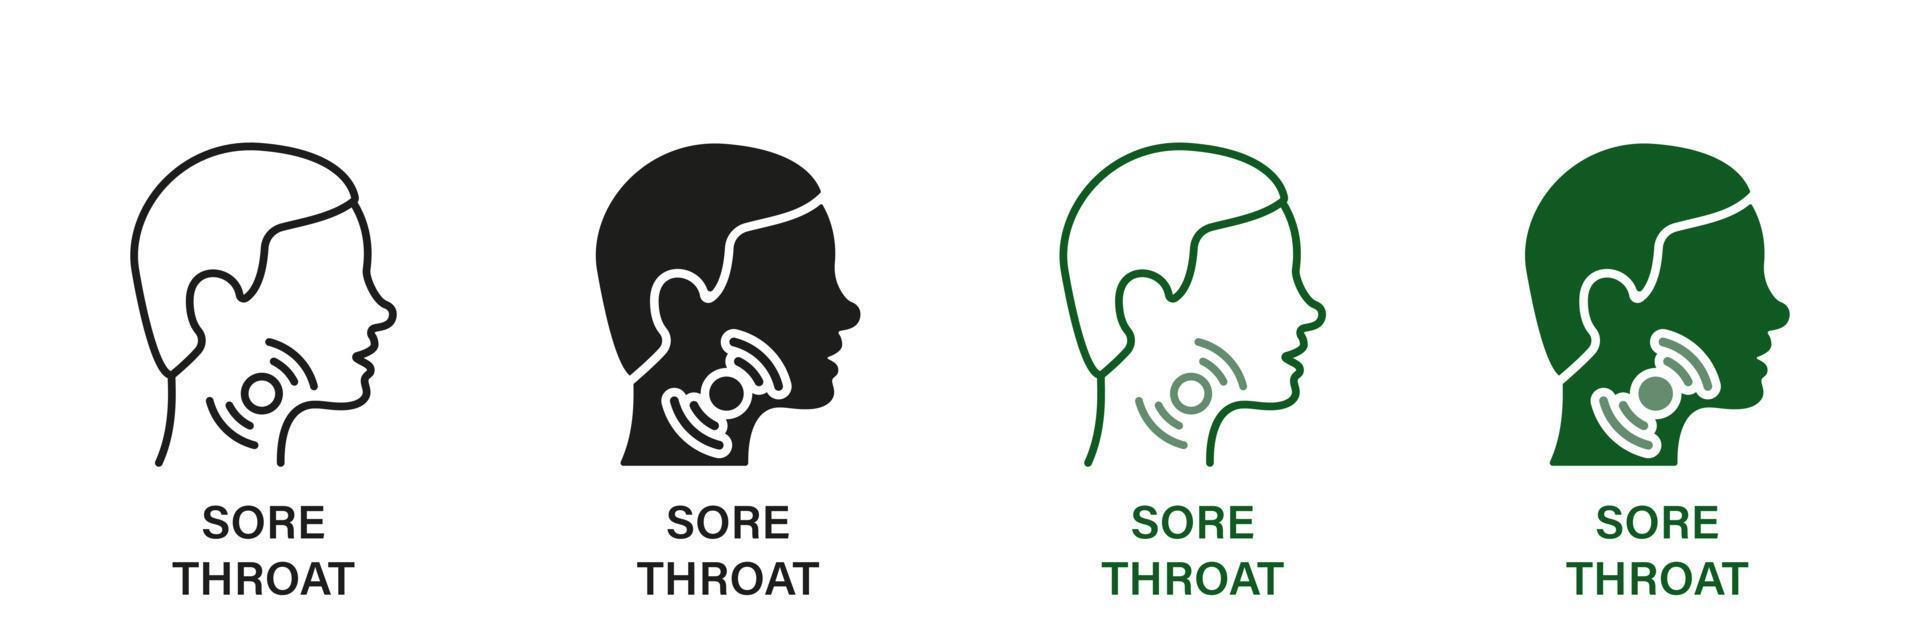 Painful Sore Throat Symbol Collection. Sore Throat Line and Silhouette Icon Set. Male Head with Symptoms of Angina, Flu, Cold Pictogram. Isolated Vector illustration.